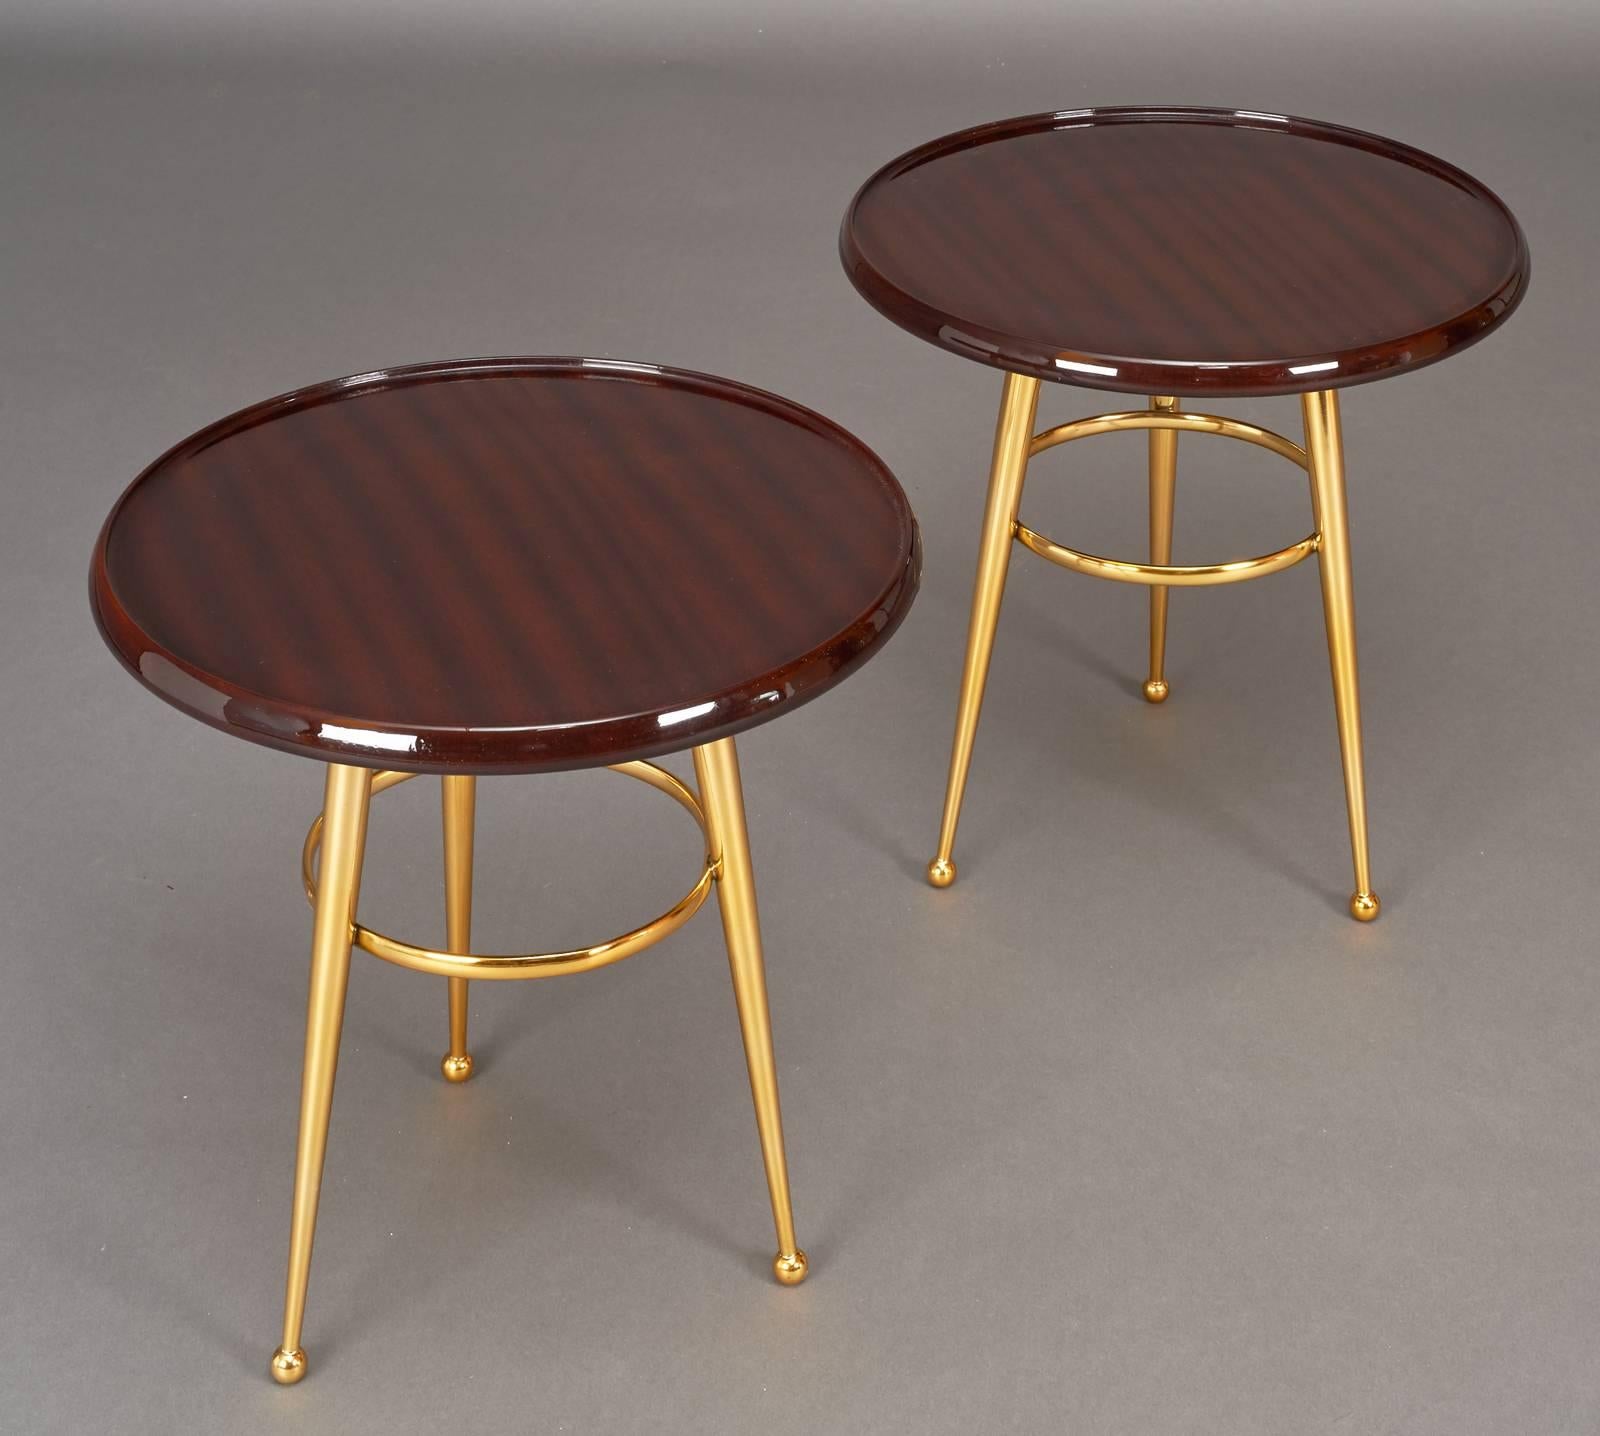 Italy, 1950s.

Pair of side tables.
Polished mahogany tables with tapered tripod polished brass base.

Measures: 17.5 Ø x 17 H.